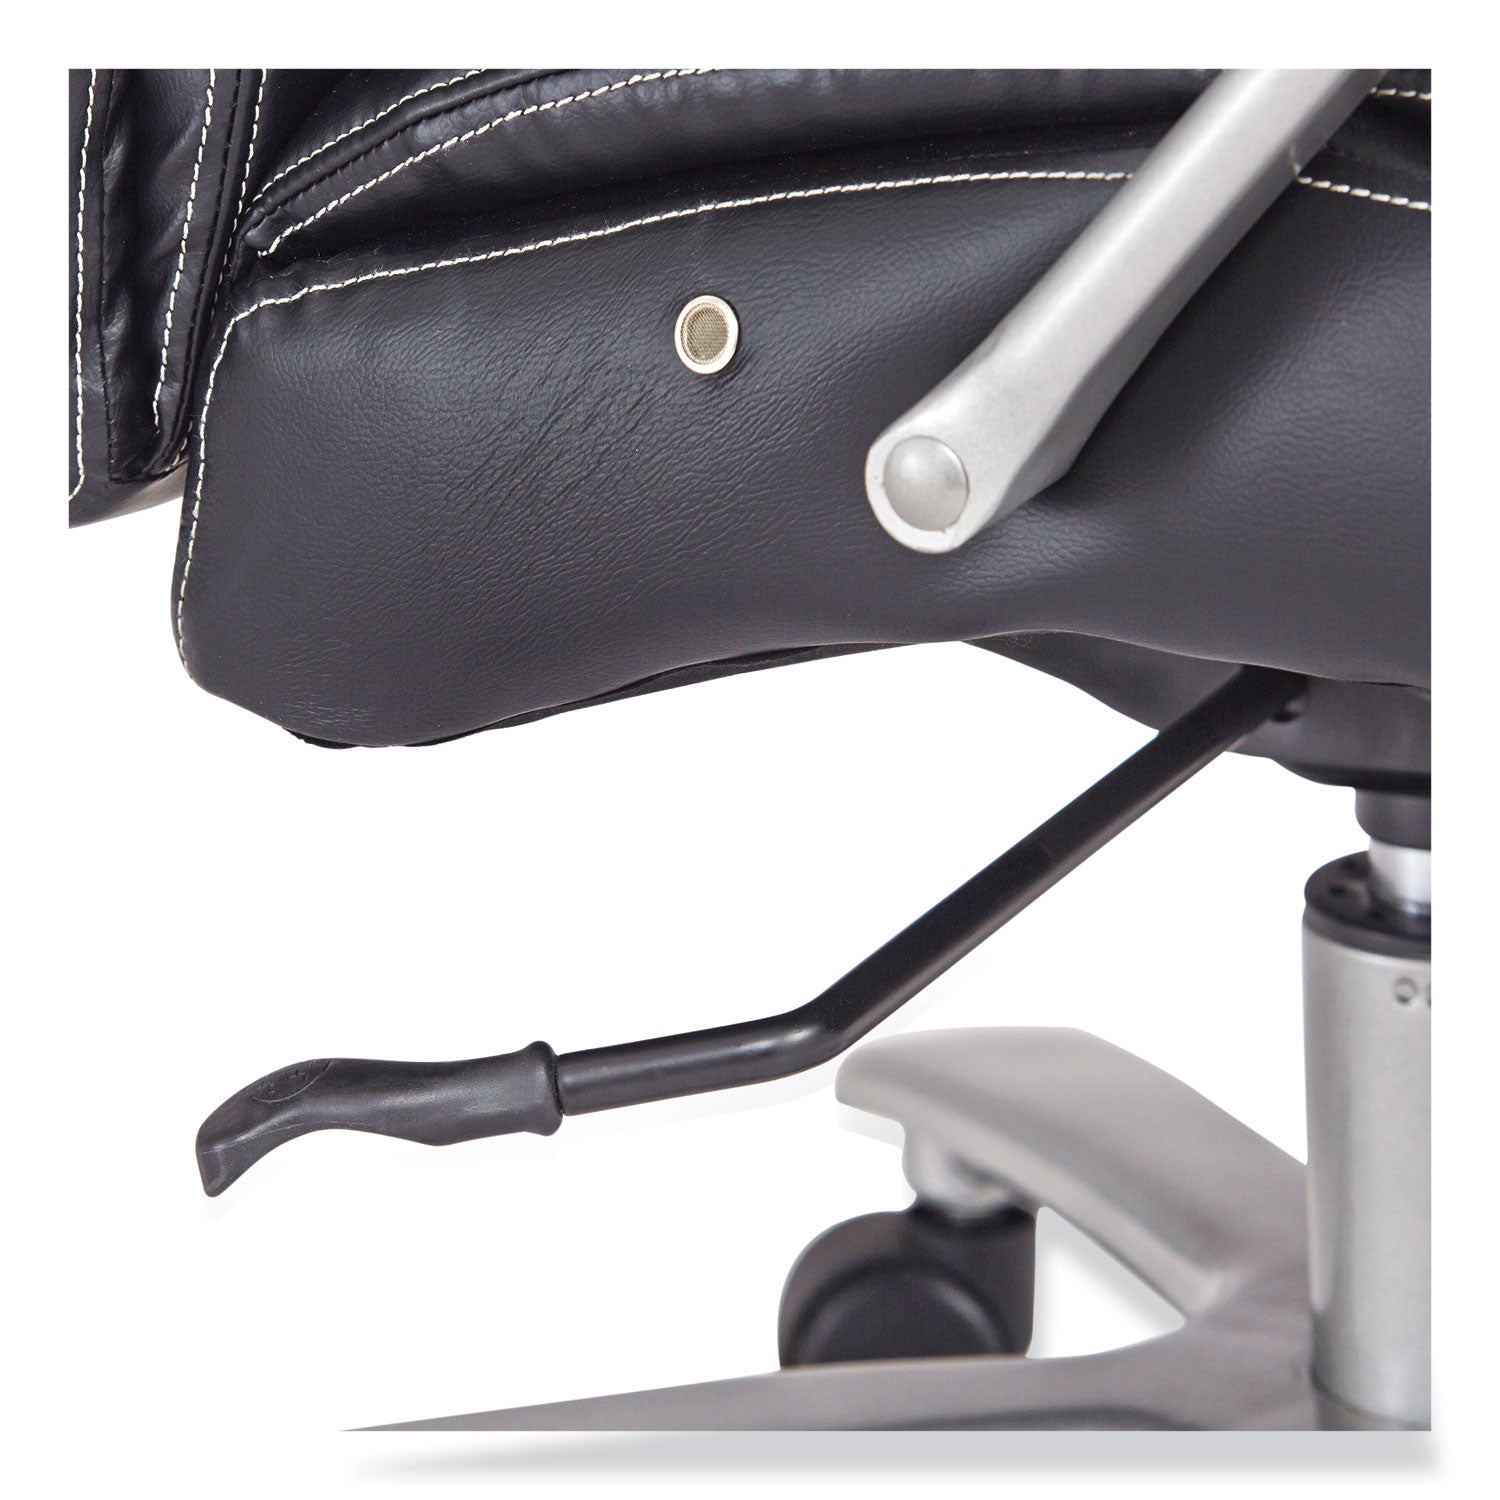 lineage-big-&-tall-high-back-task-chair-max-500-lb-205-to-2425-high-black-seat-chrome-base-ships-in-1-3-business-days_saf3502bl - 5